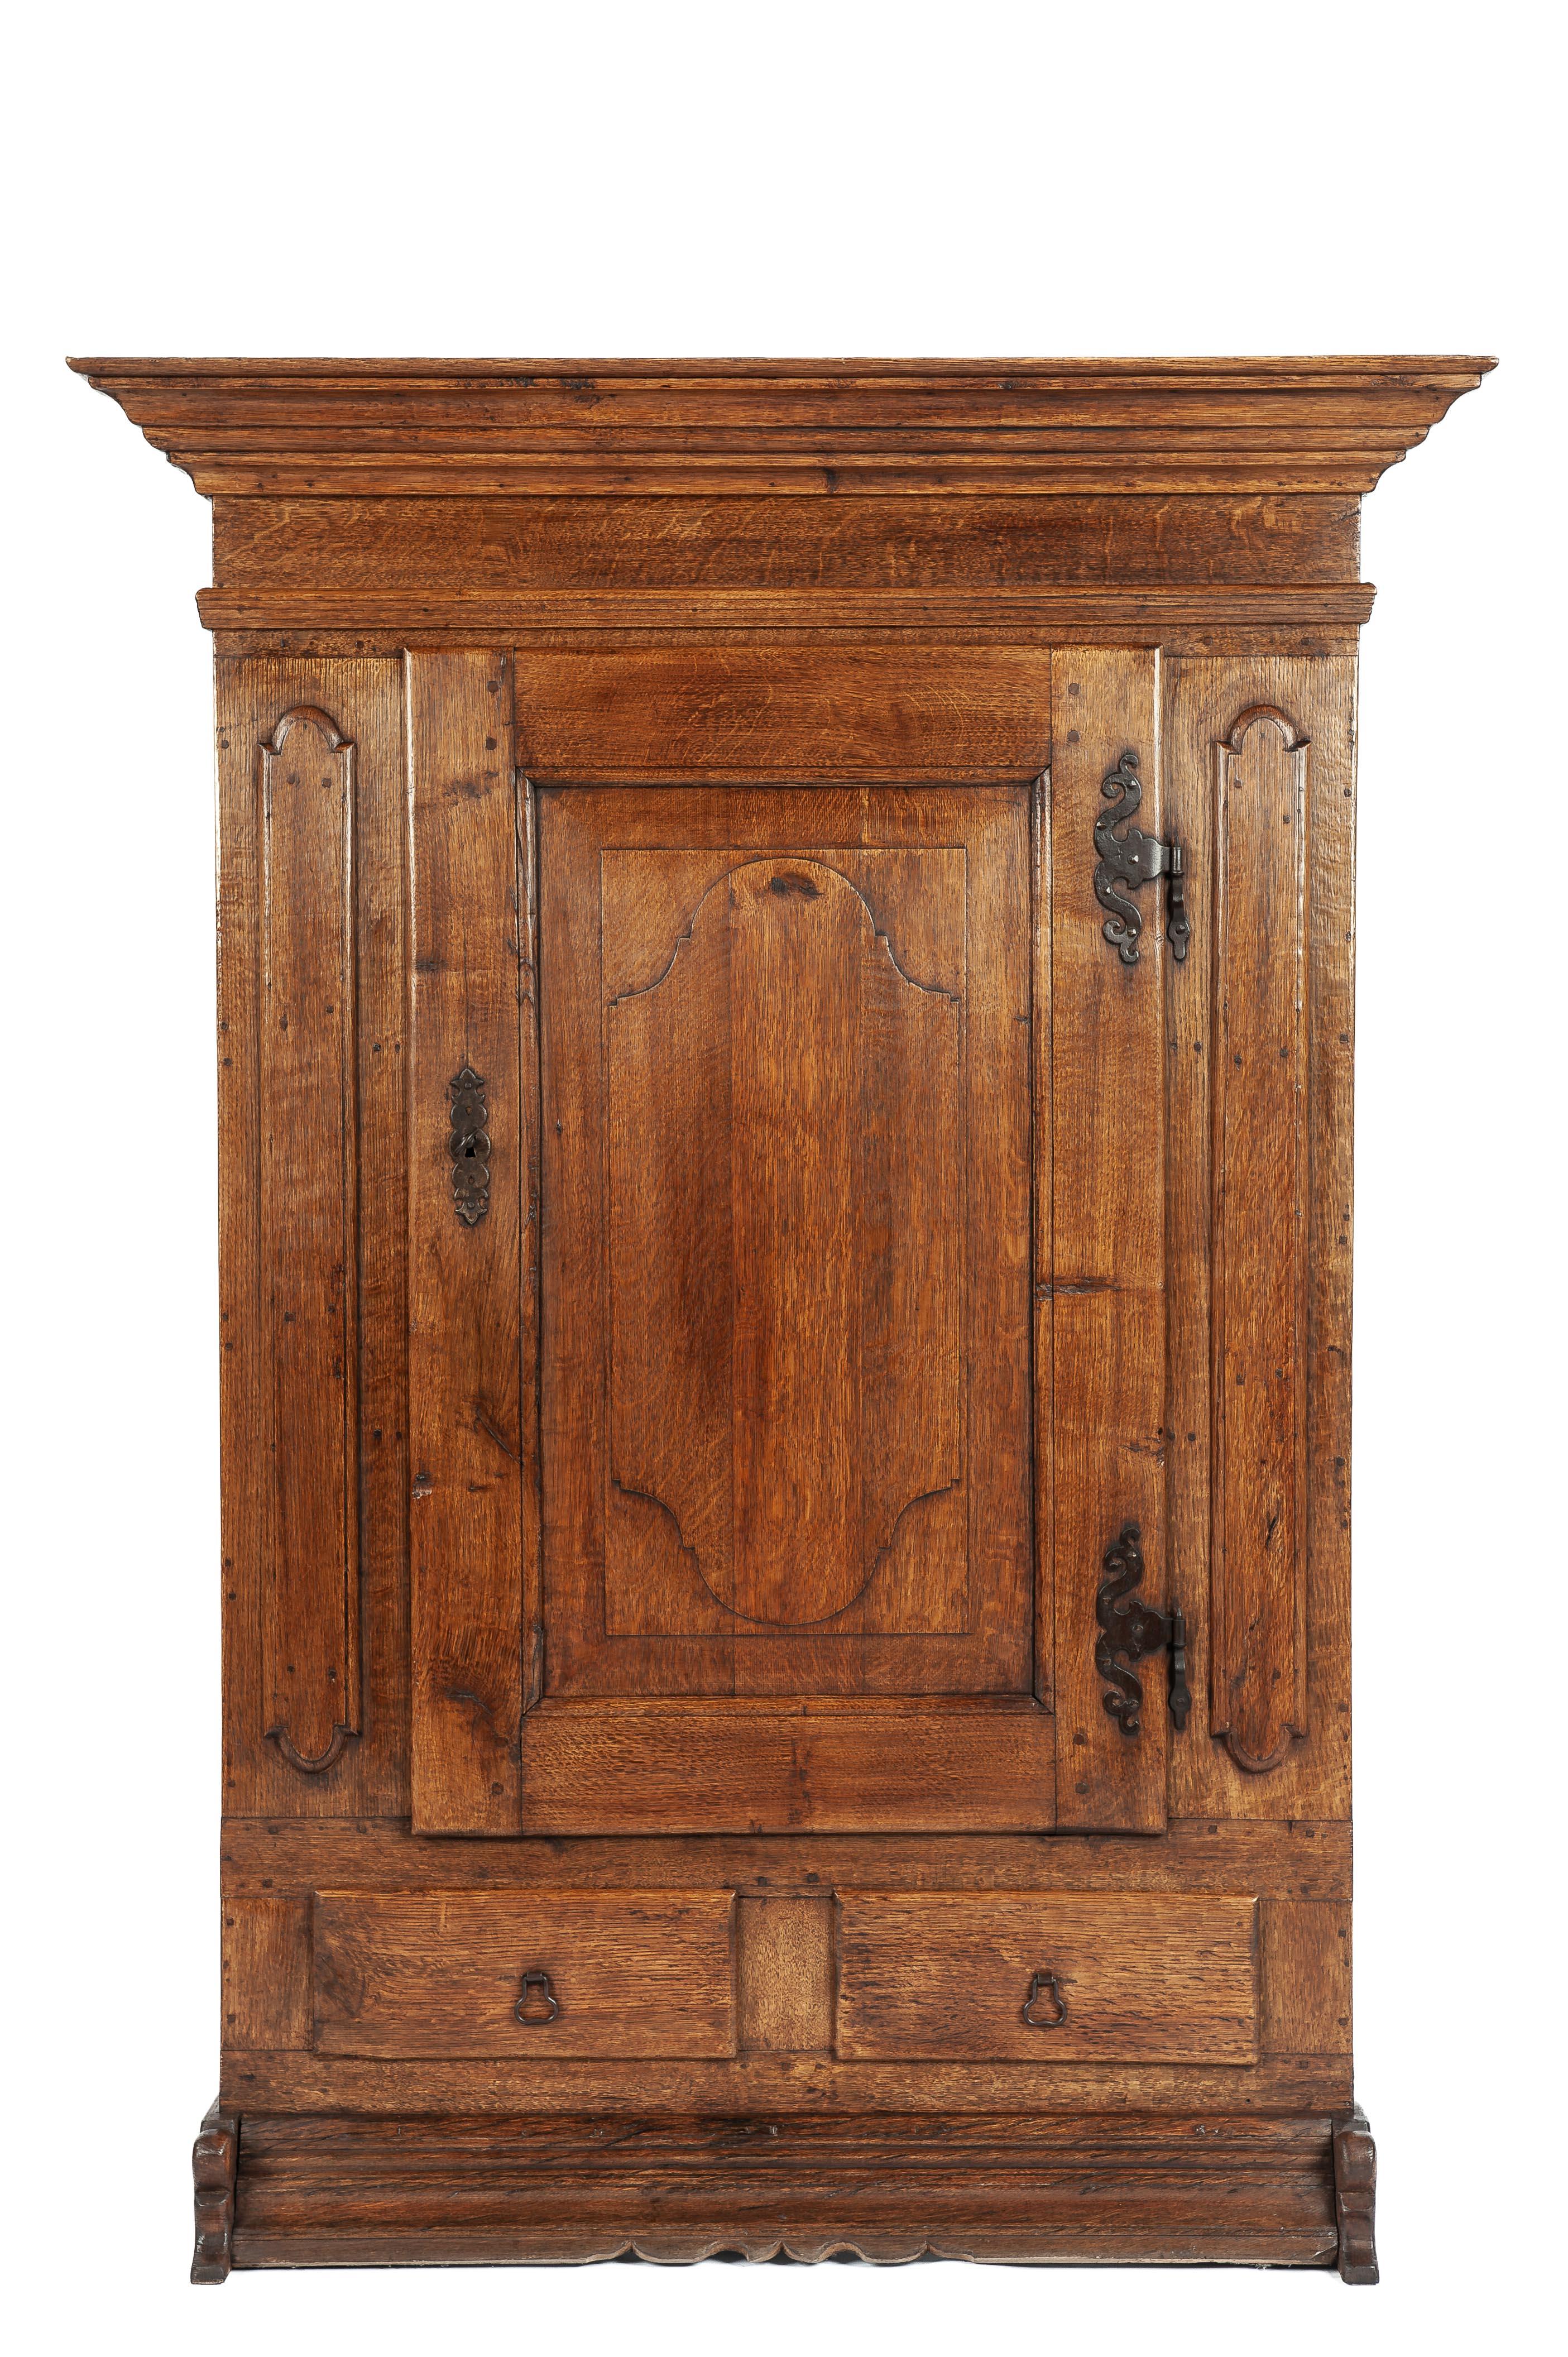 Offered here is a magnificent antique cabinet crafted in Germany around 1900. This cabinet is entirely constructed from solid oak wood and features a single door with two drawers below. The door boasts a beautifully designed serpent-shaped raised